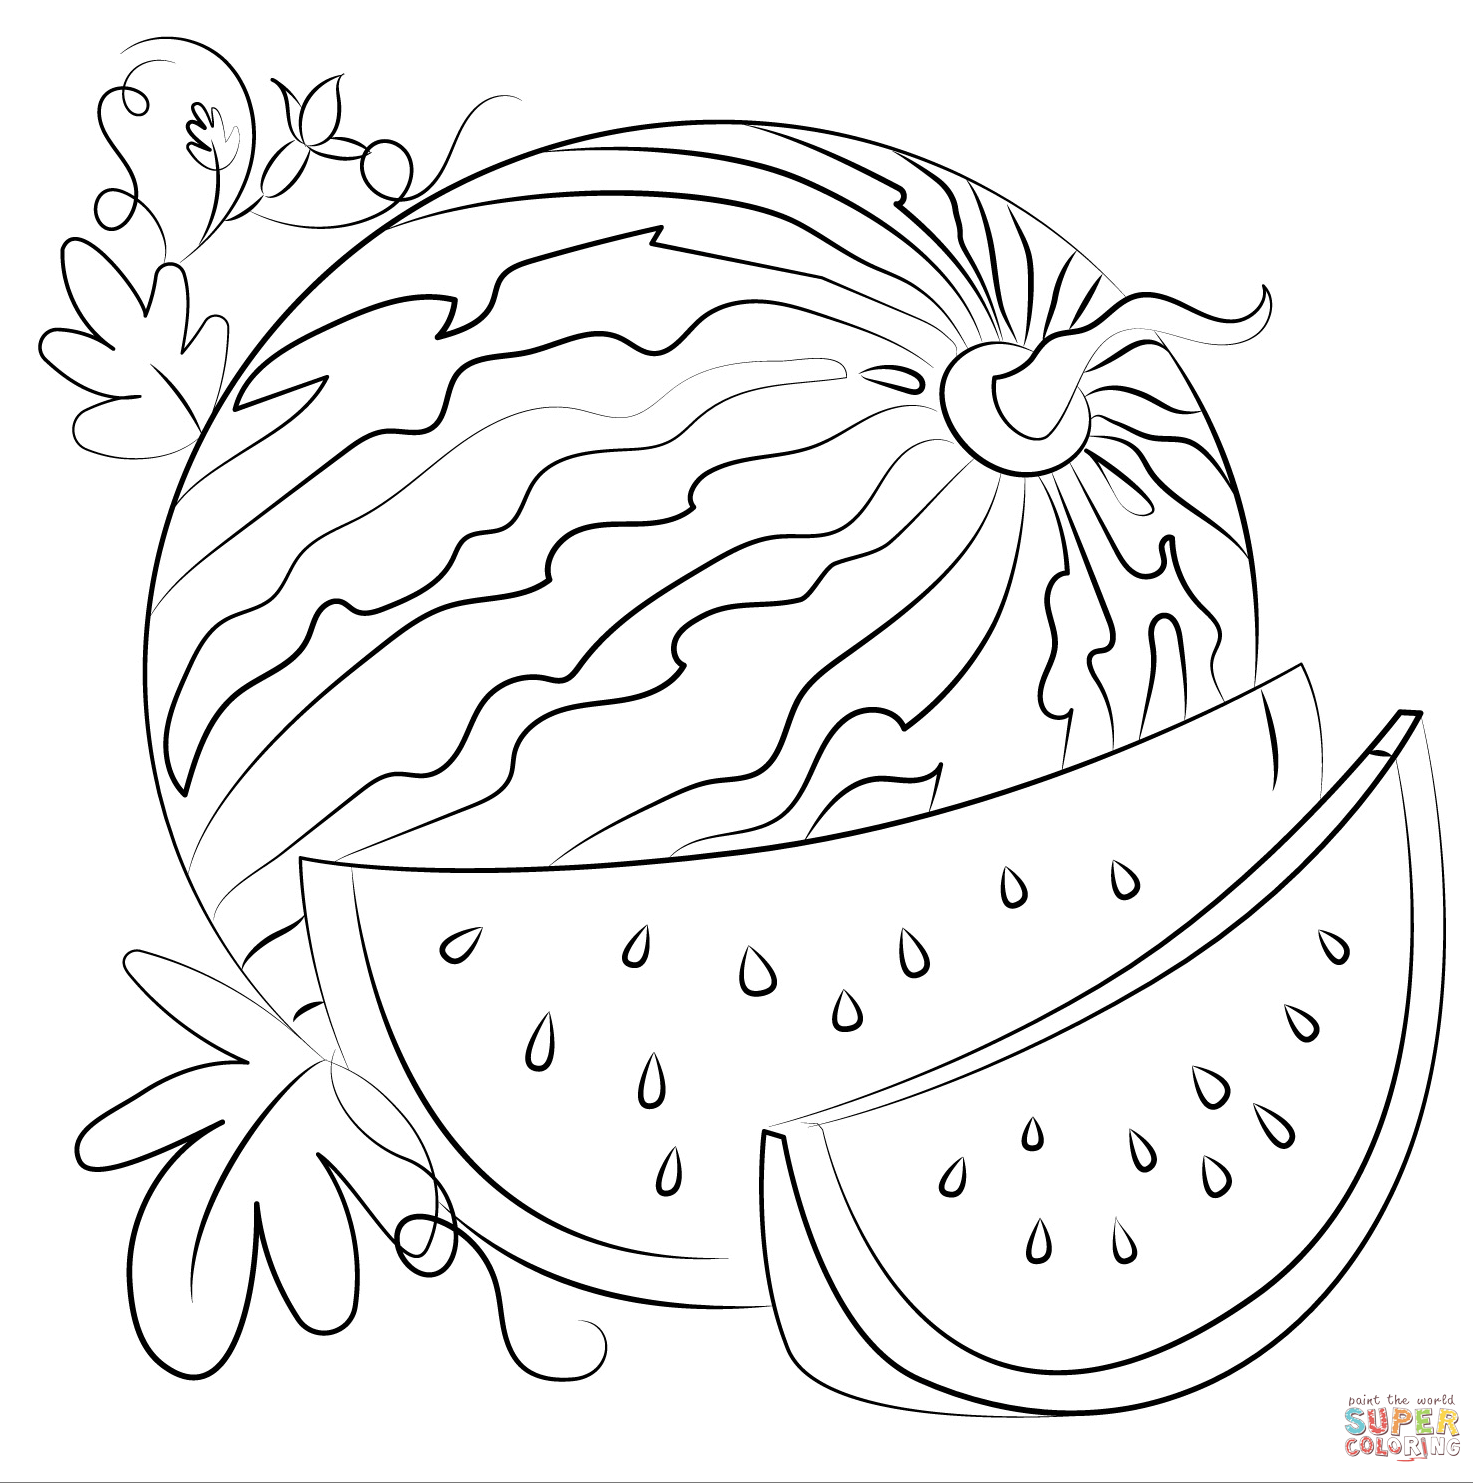 Watermelon for Children Coloring Pages